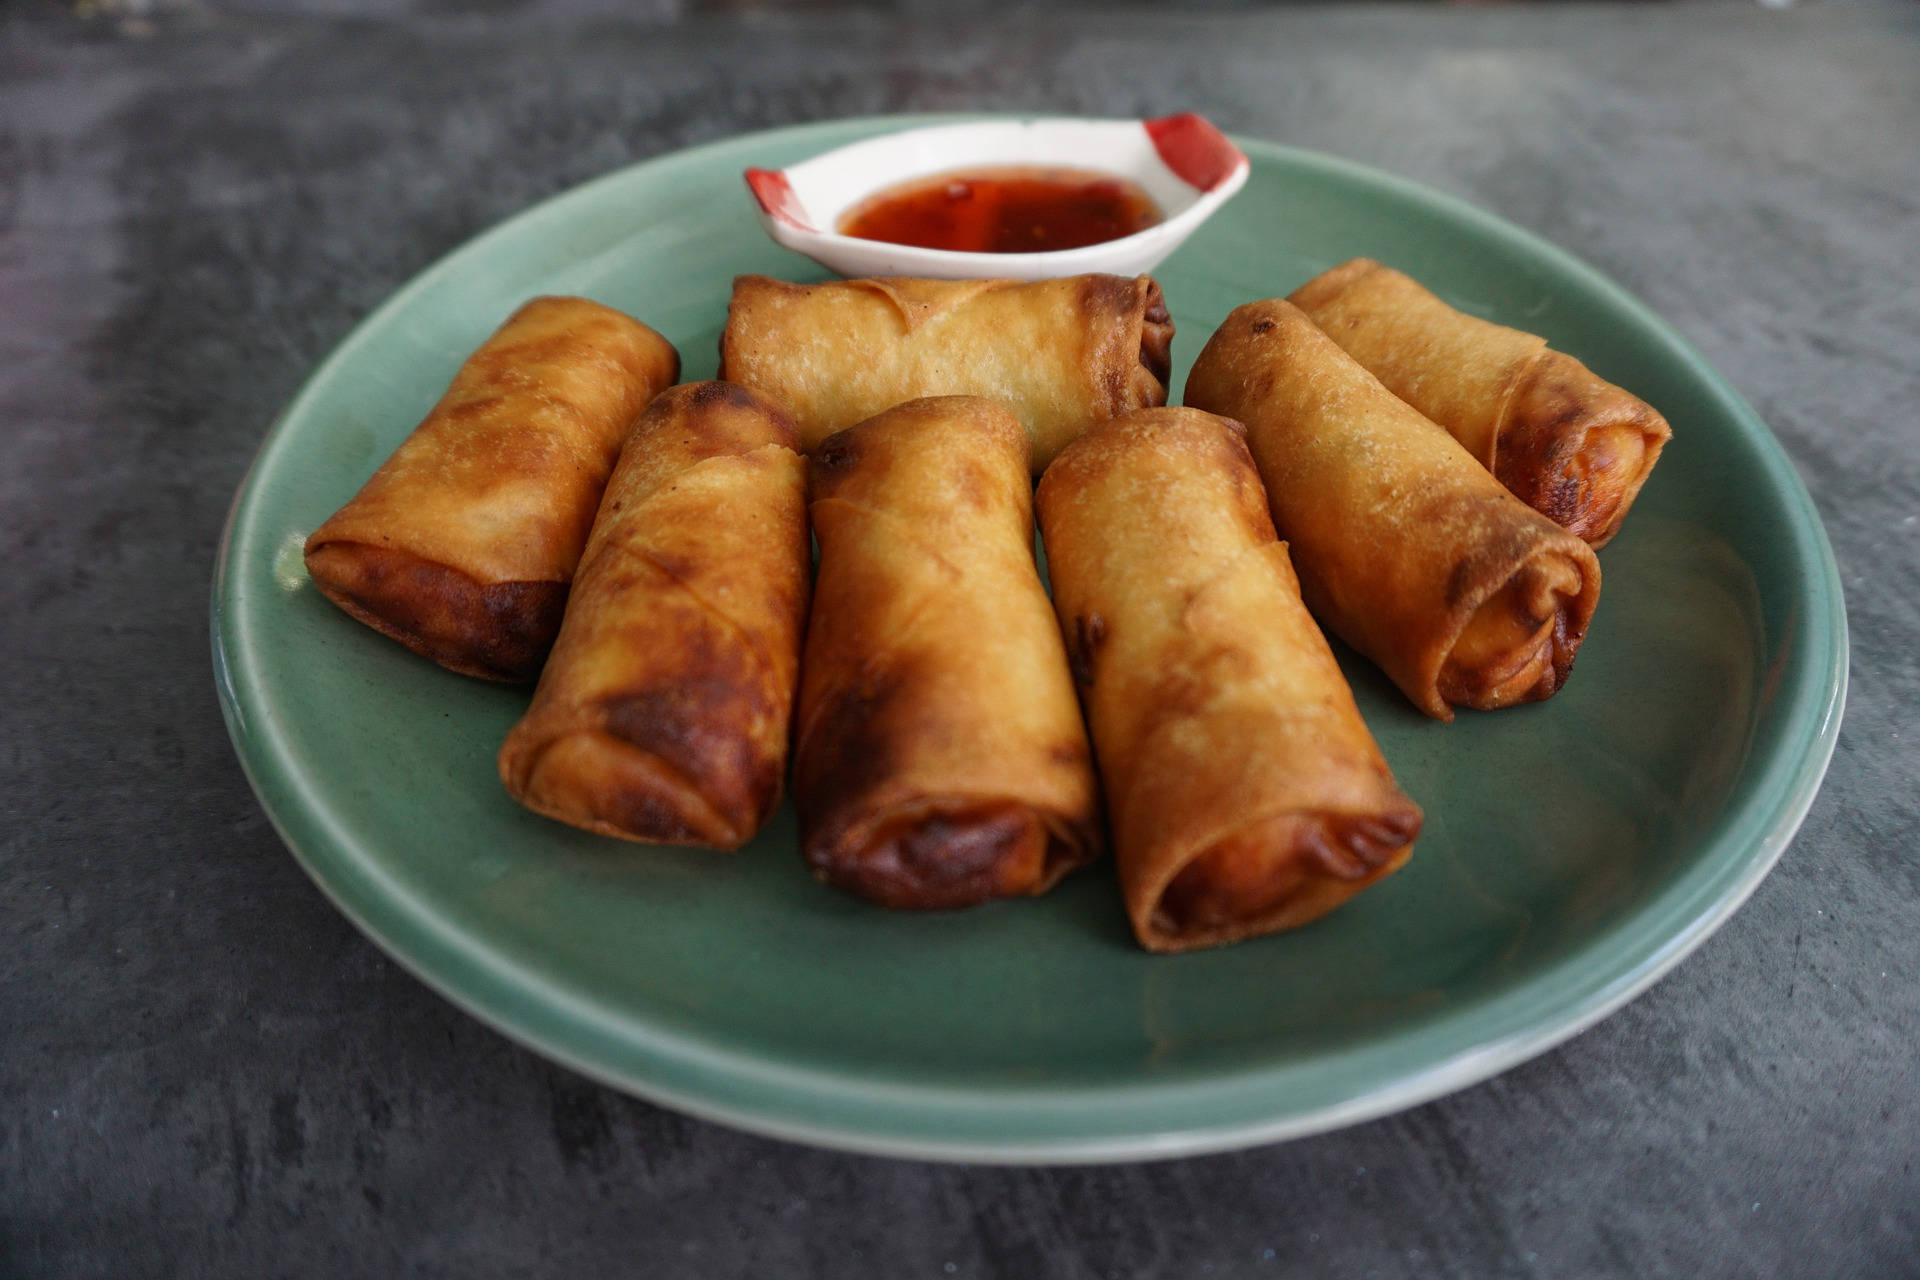 Caption: Deliciously Crisp Egg Rolls On A Simple Plate